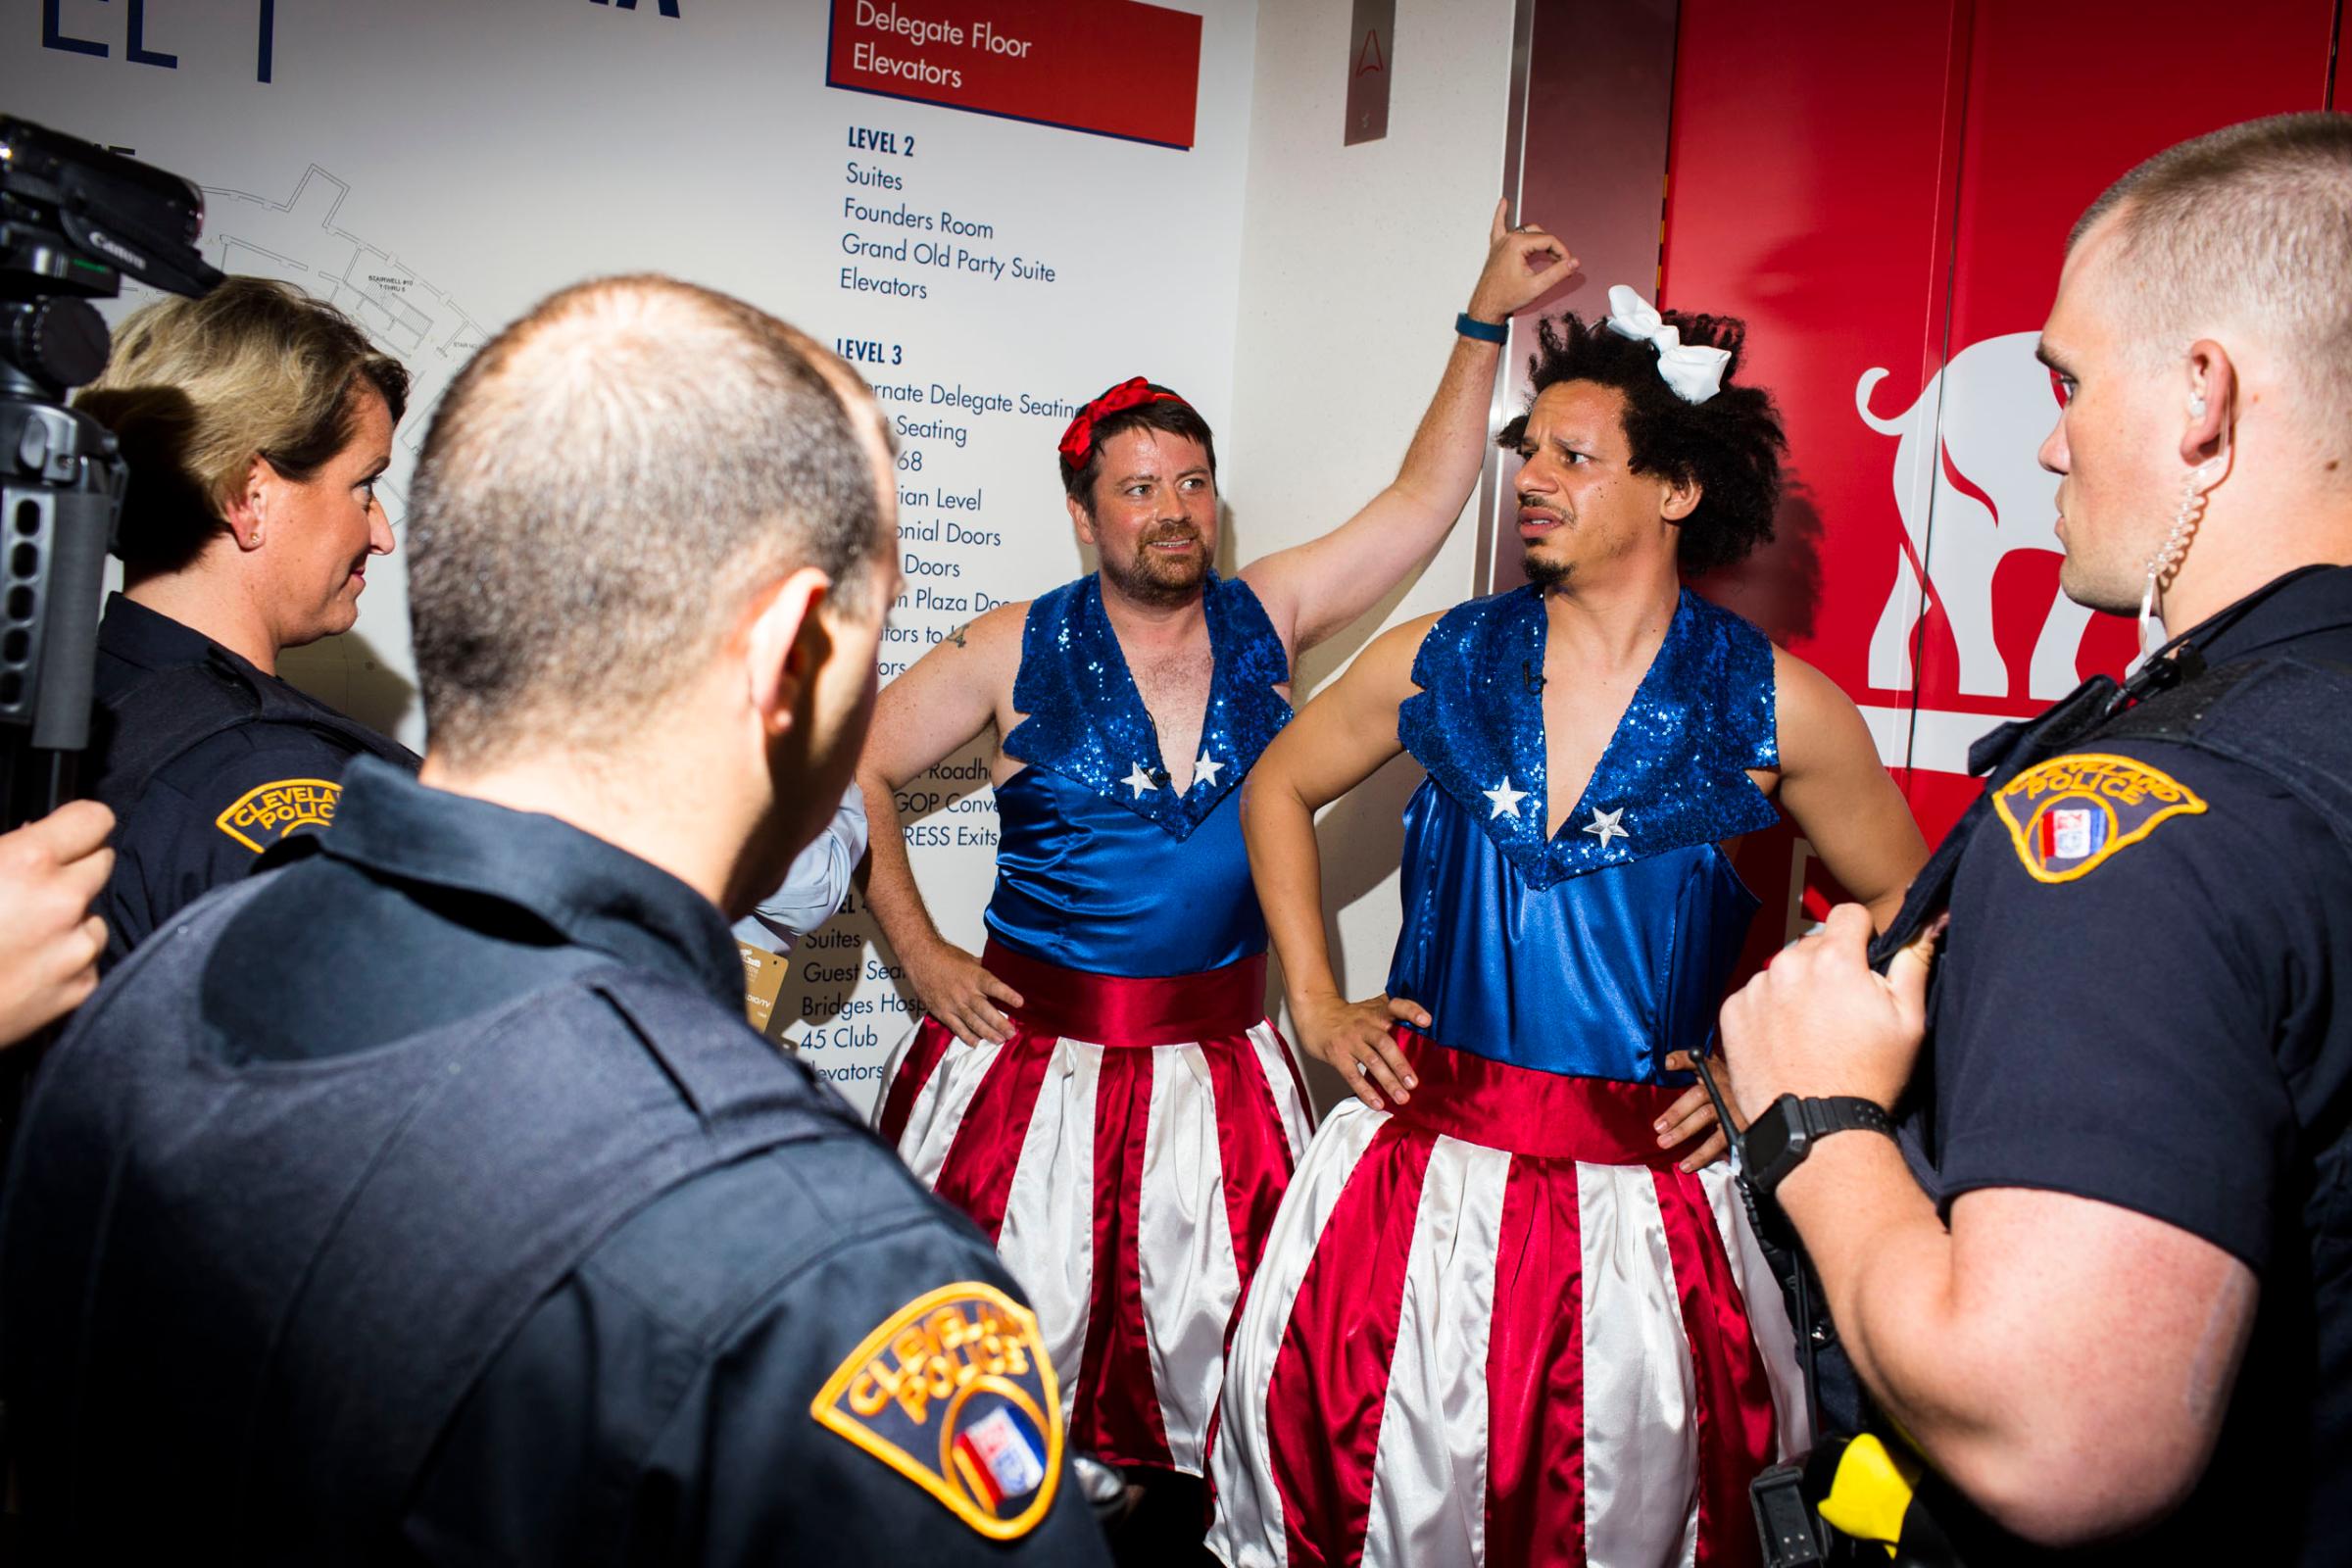 Comedian Eric Andre is escorted from the 2016 Republican National Convention in Cleveland on Tuesday, July 19, 2016.